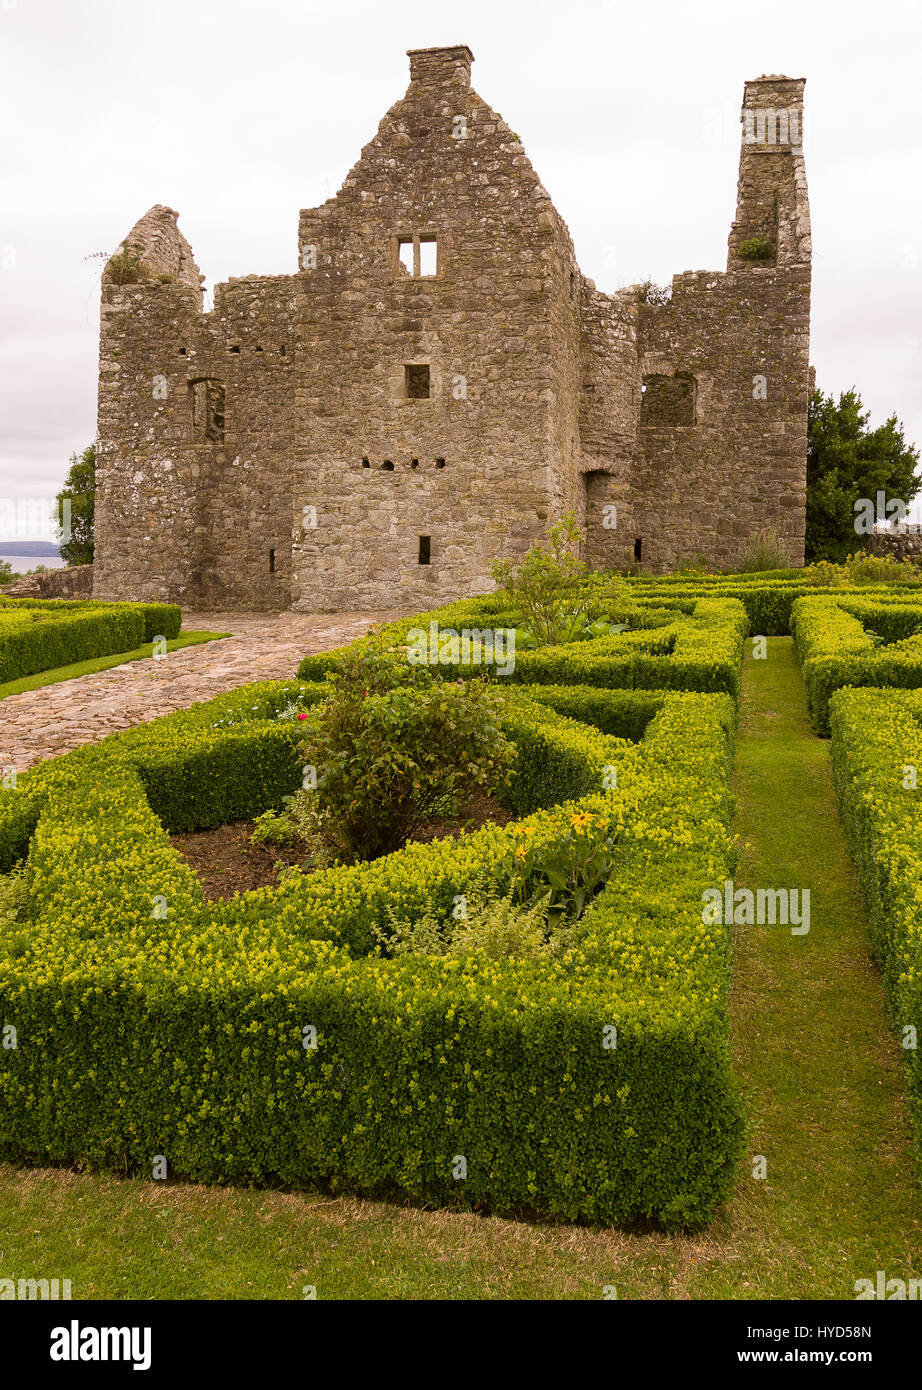 TULLY CASTLE, NORTHERN IRELAND - Gardens at ruins of Tully Castle, near Enniskillen, on Lower Lough Erne. Tully Castle, built early 1600s, in County Fermanagh, near the village of Blaney. Stock Photo